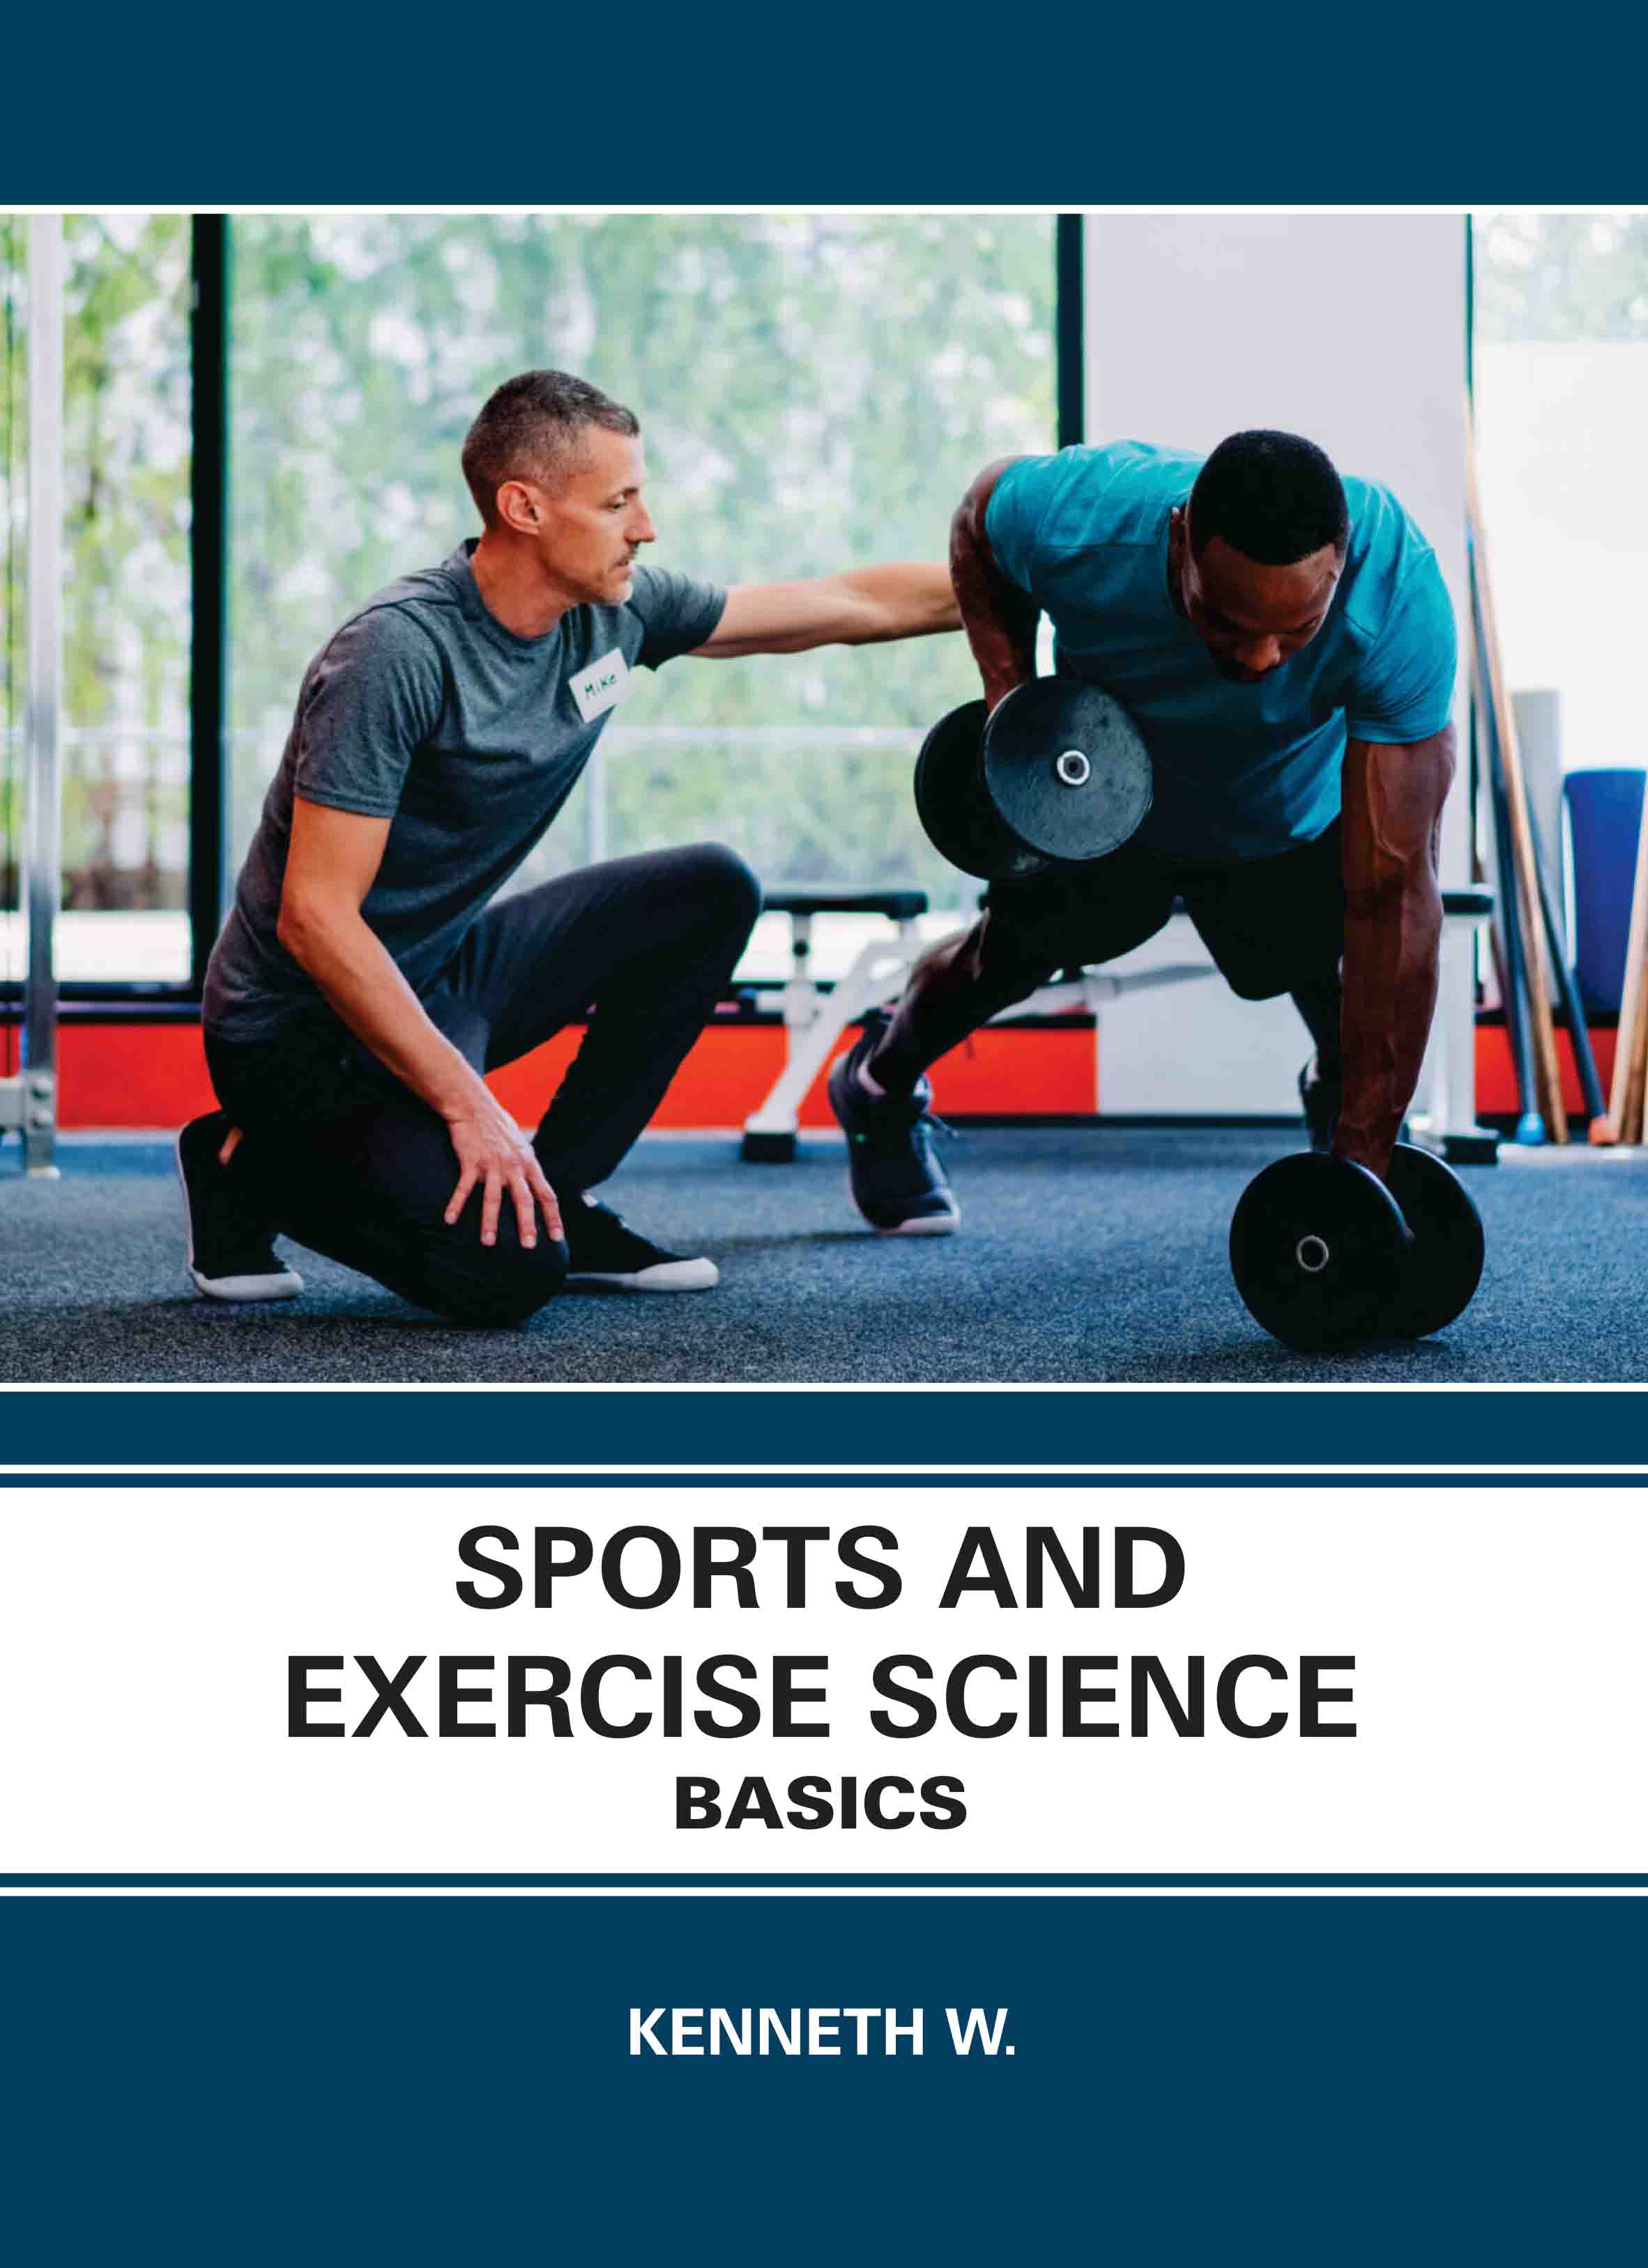 Sports and Exercise Science: Basics